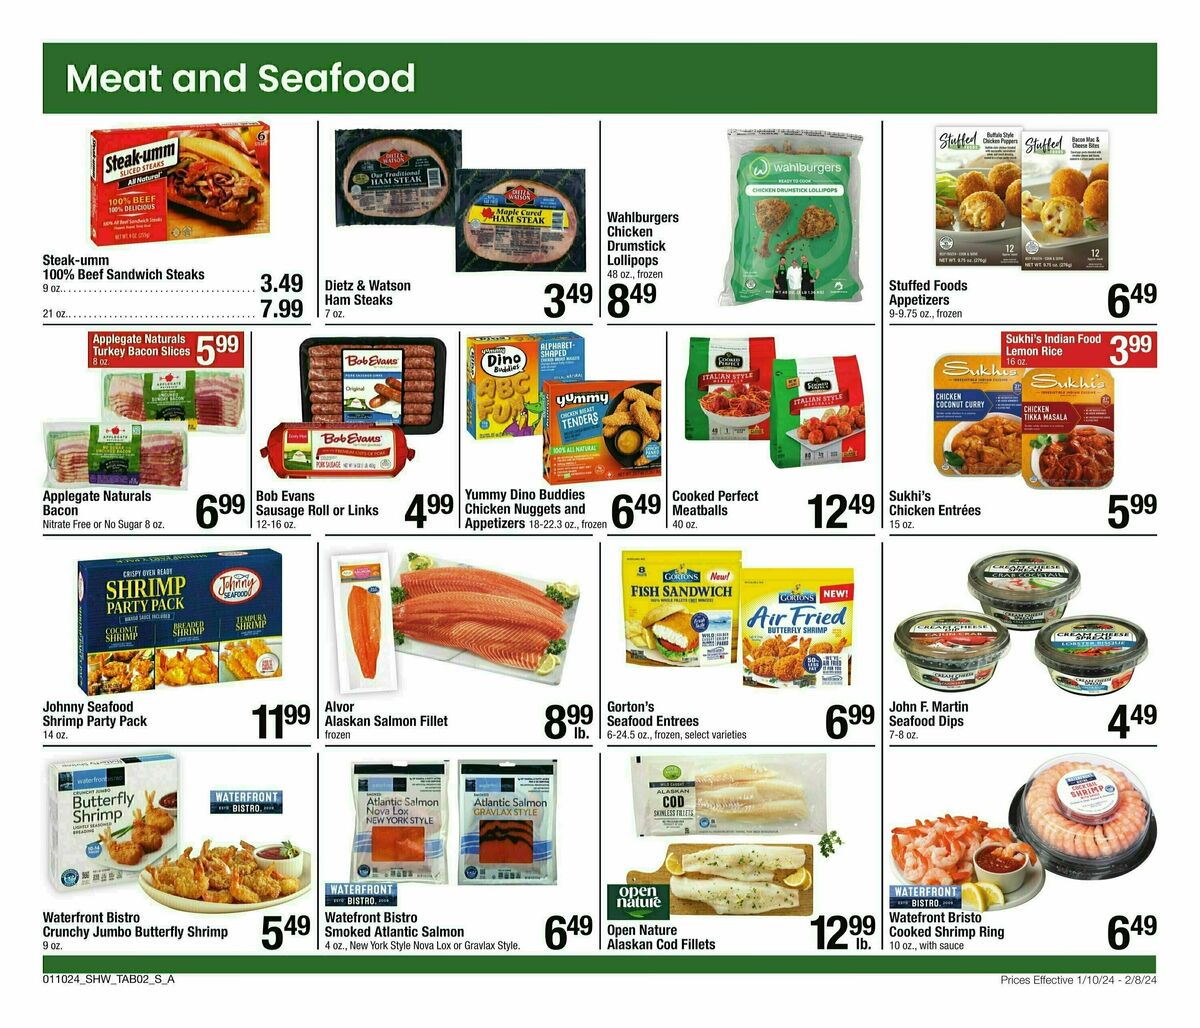 Shaw's Big Book of Savings Weekly Ad from January 10